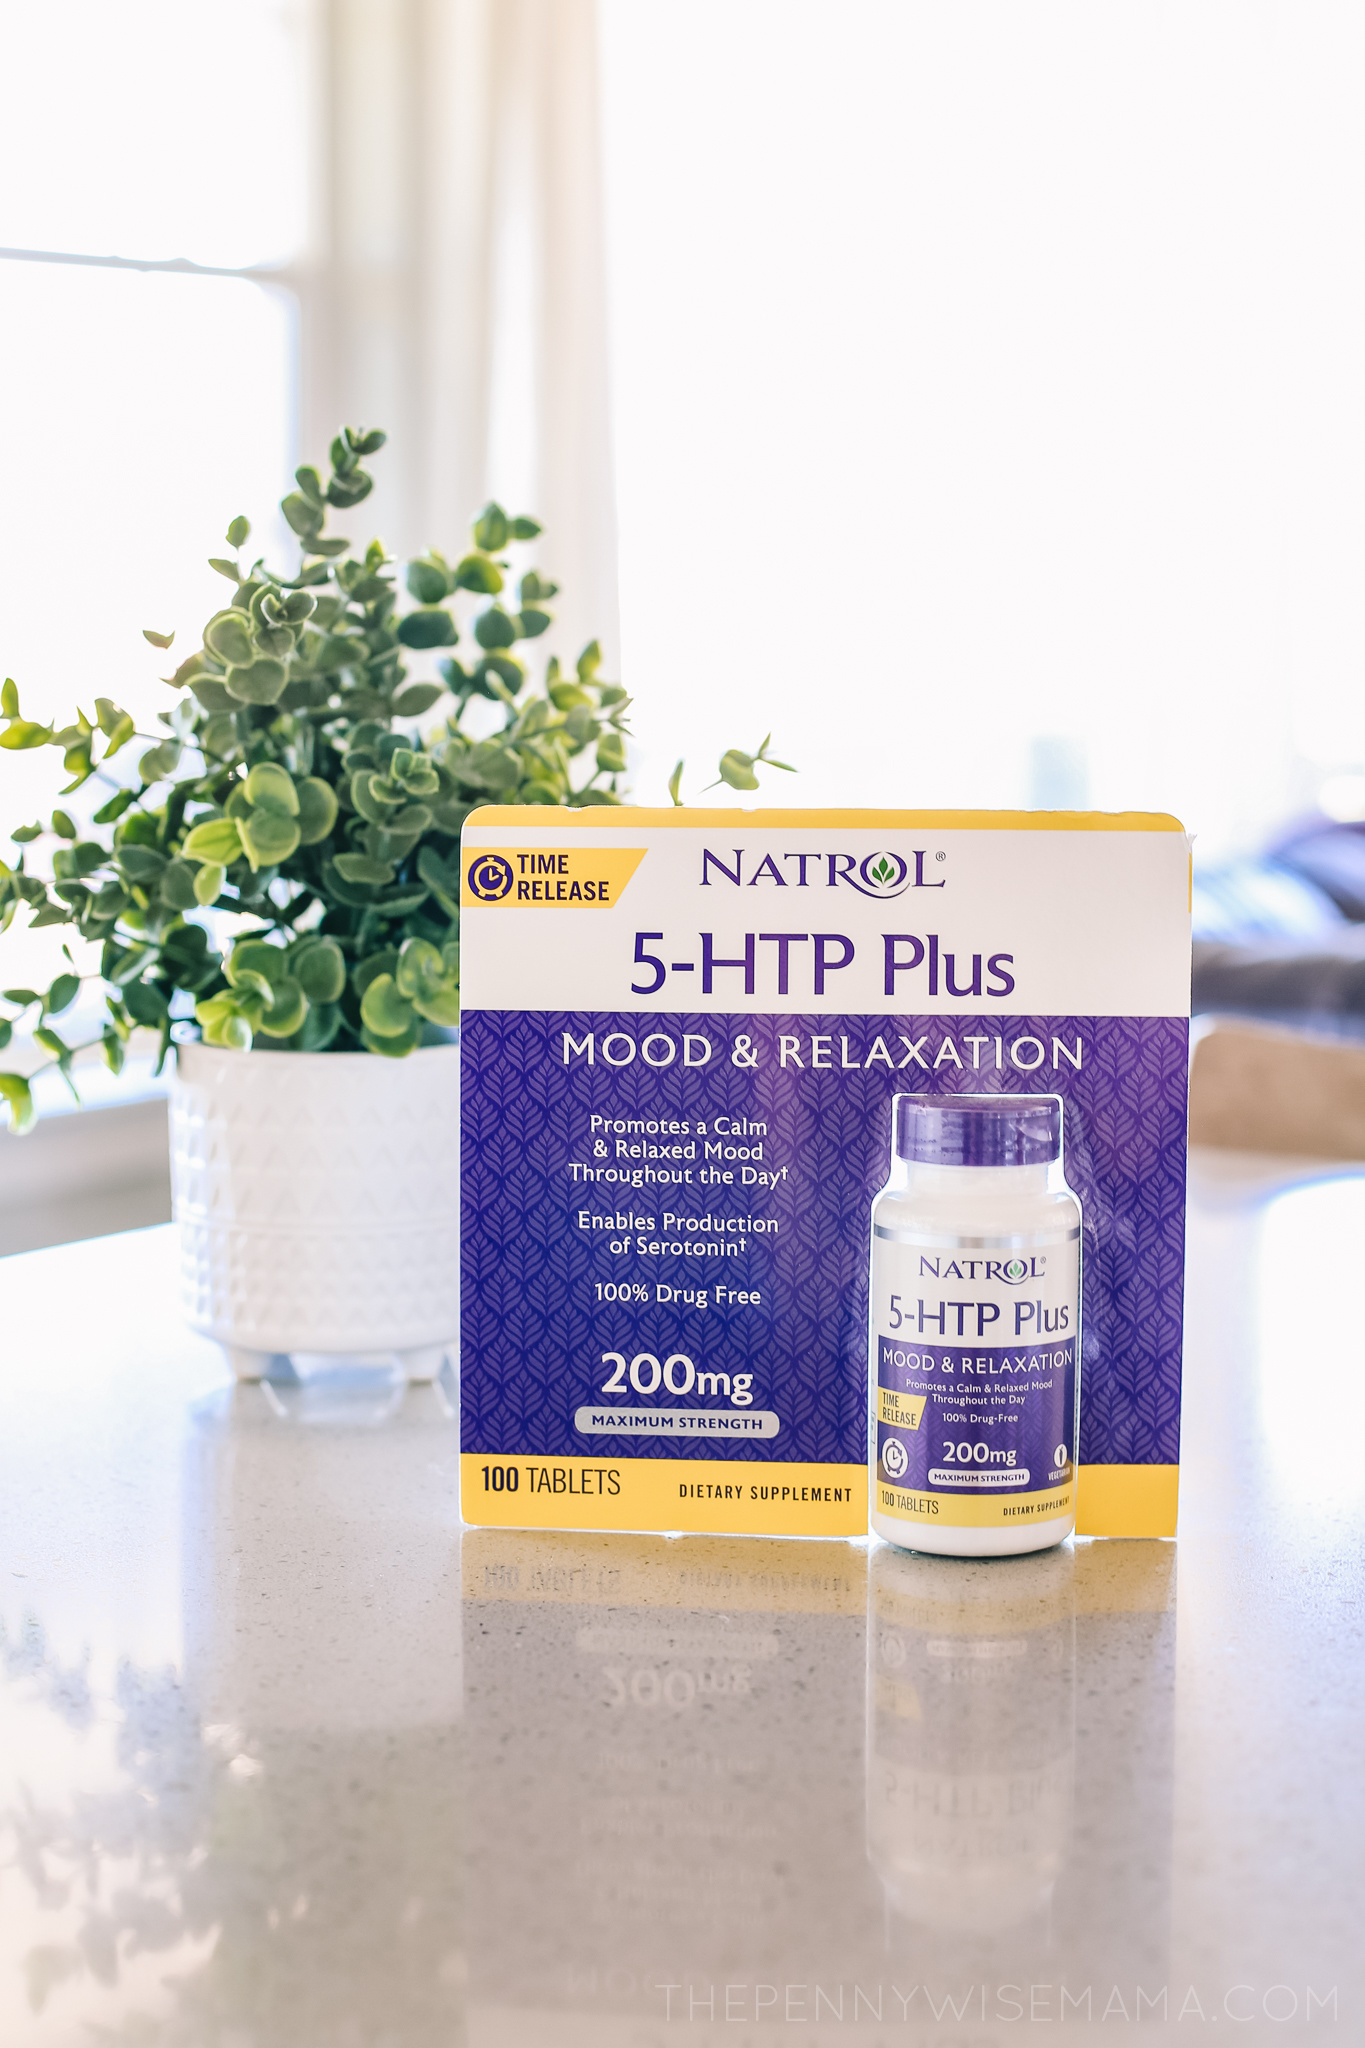 Natrol 5-HTP Plus for Mood & Relaxation